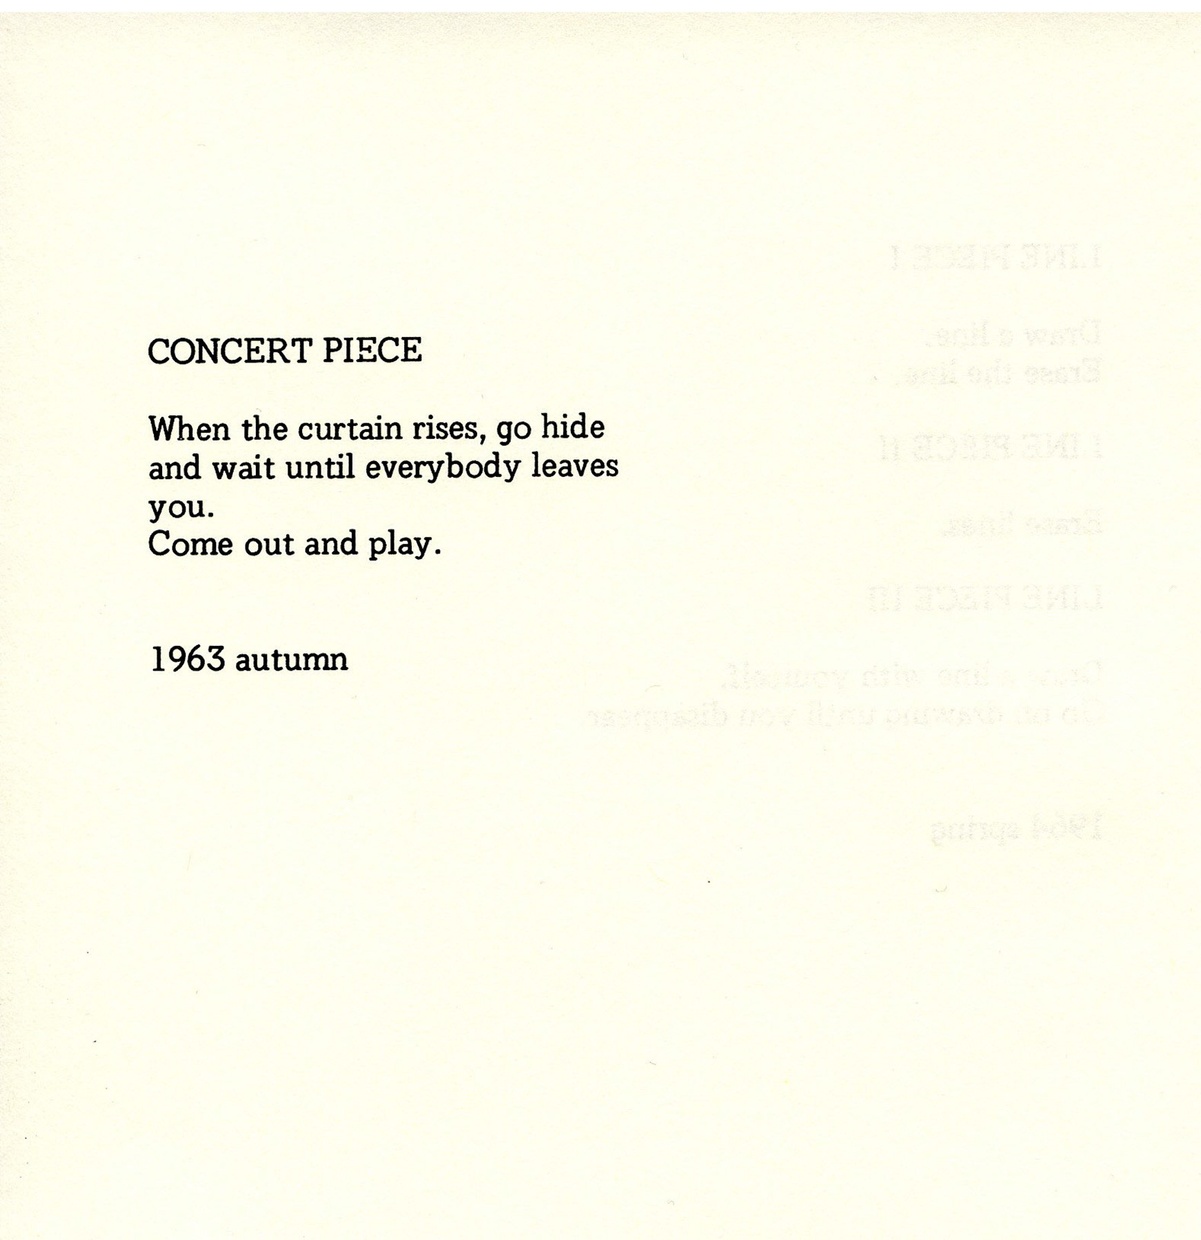 A cream piece of paper with printed, black text "CONCERT PIECE When the curtain rises, go hide and wait until everybody leaves you. Come out and play. 1963 autumn."